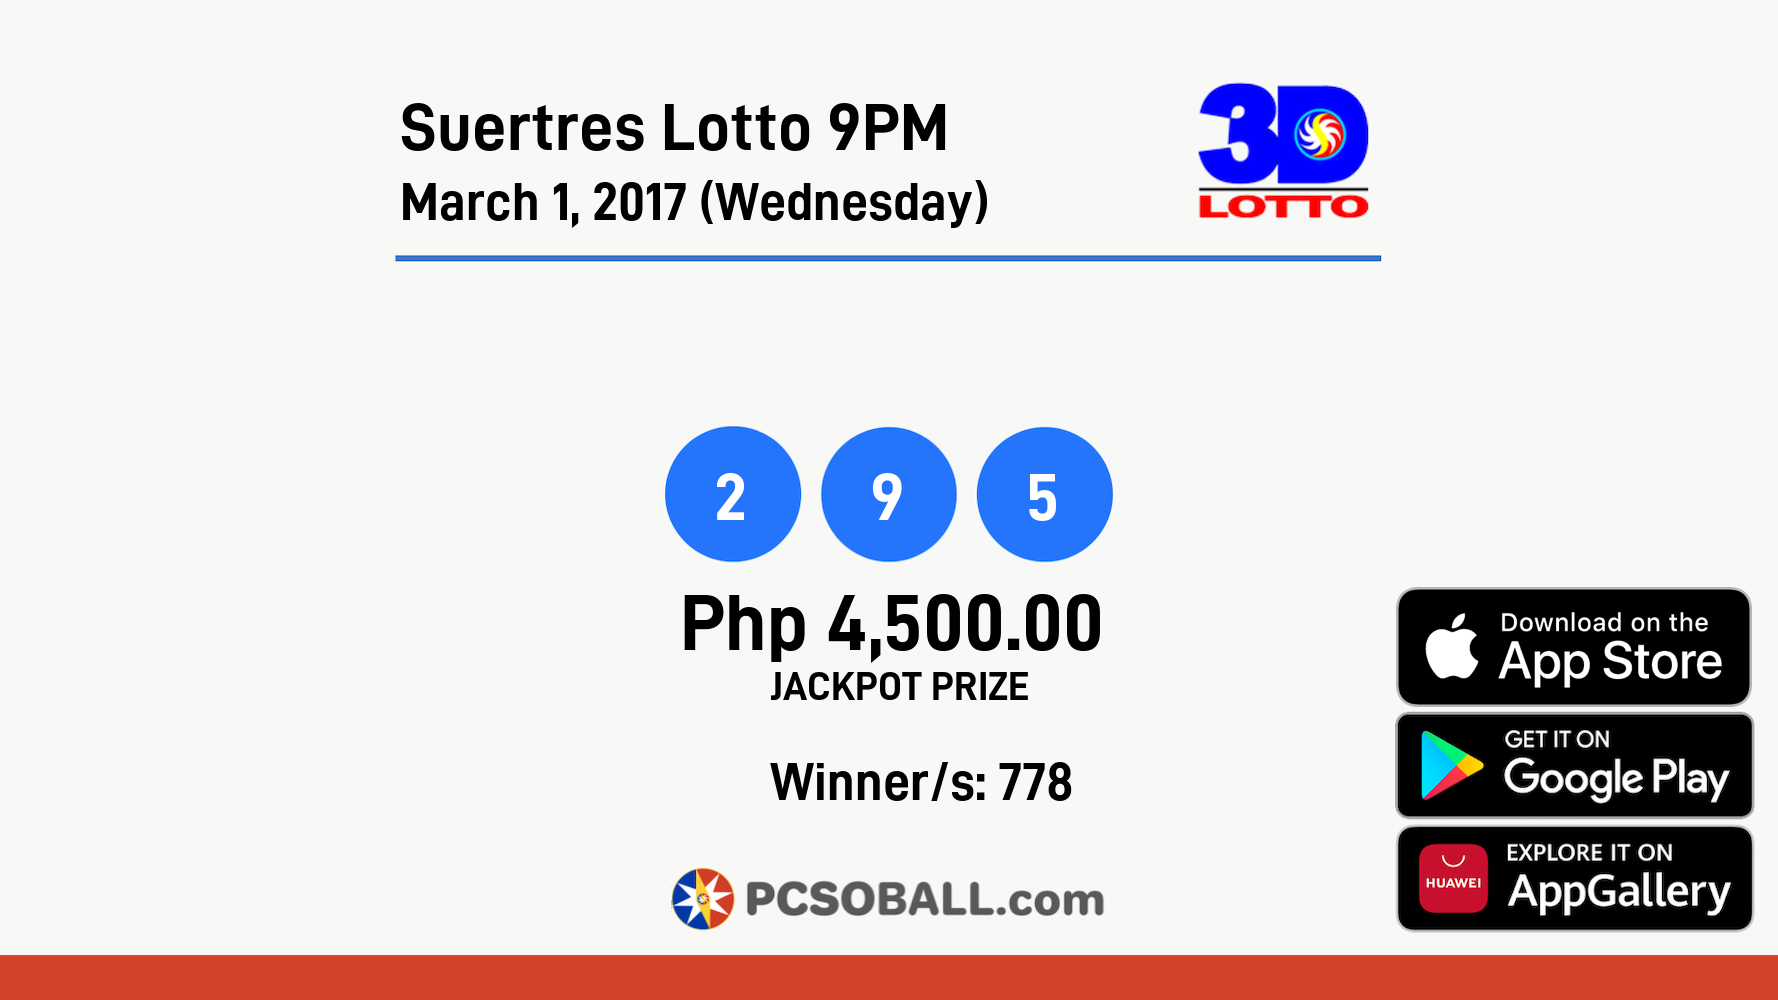 Suertres Lotto 9PM March 1, 2017 (Wednesday) Result